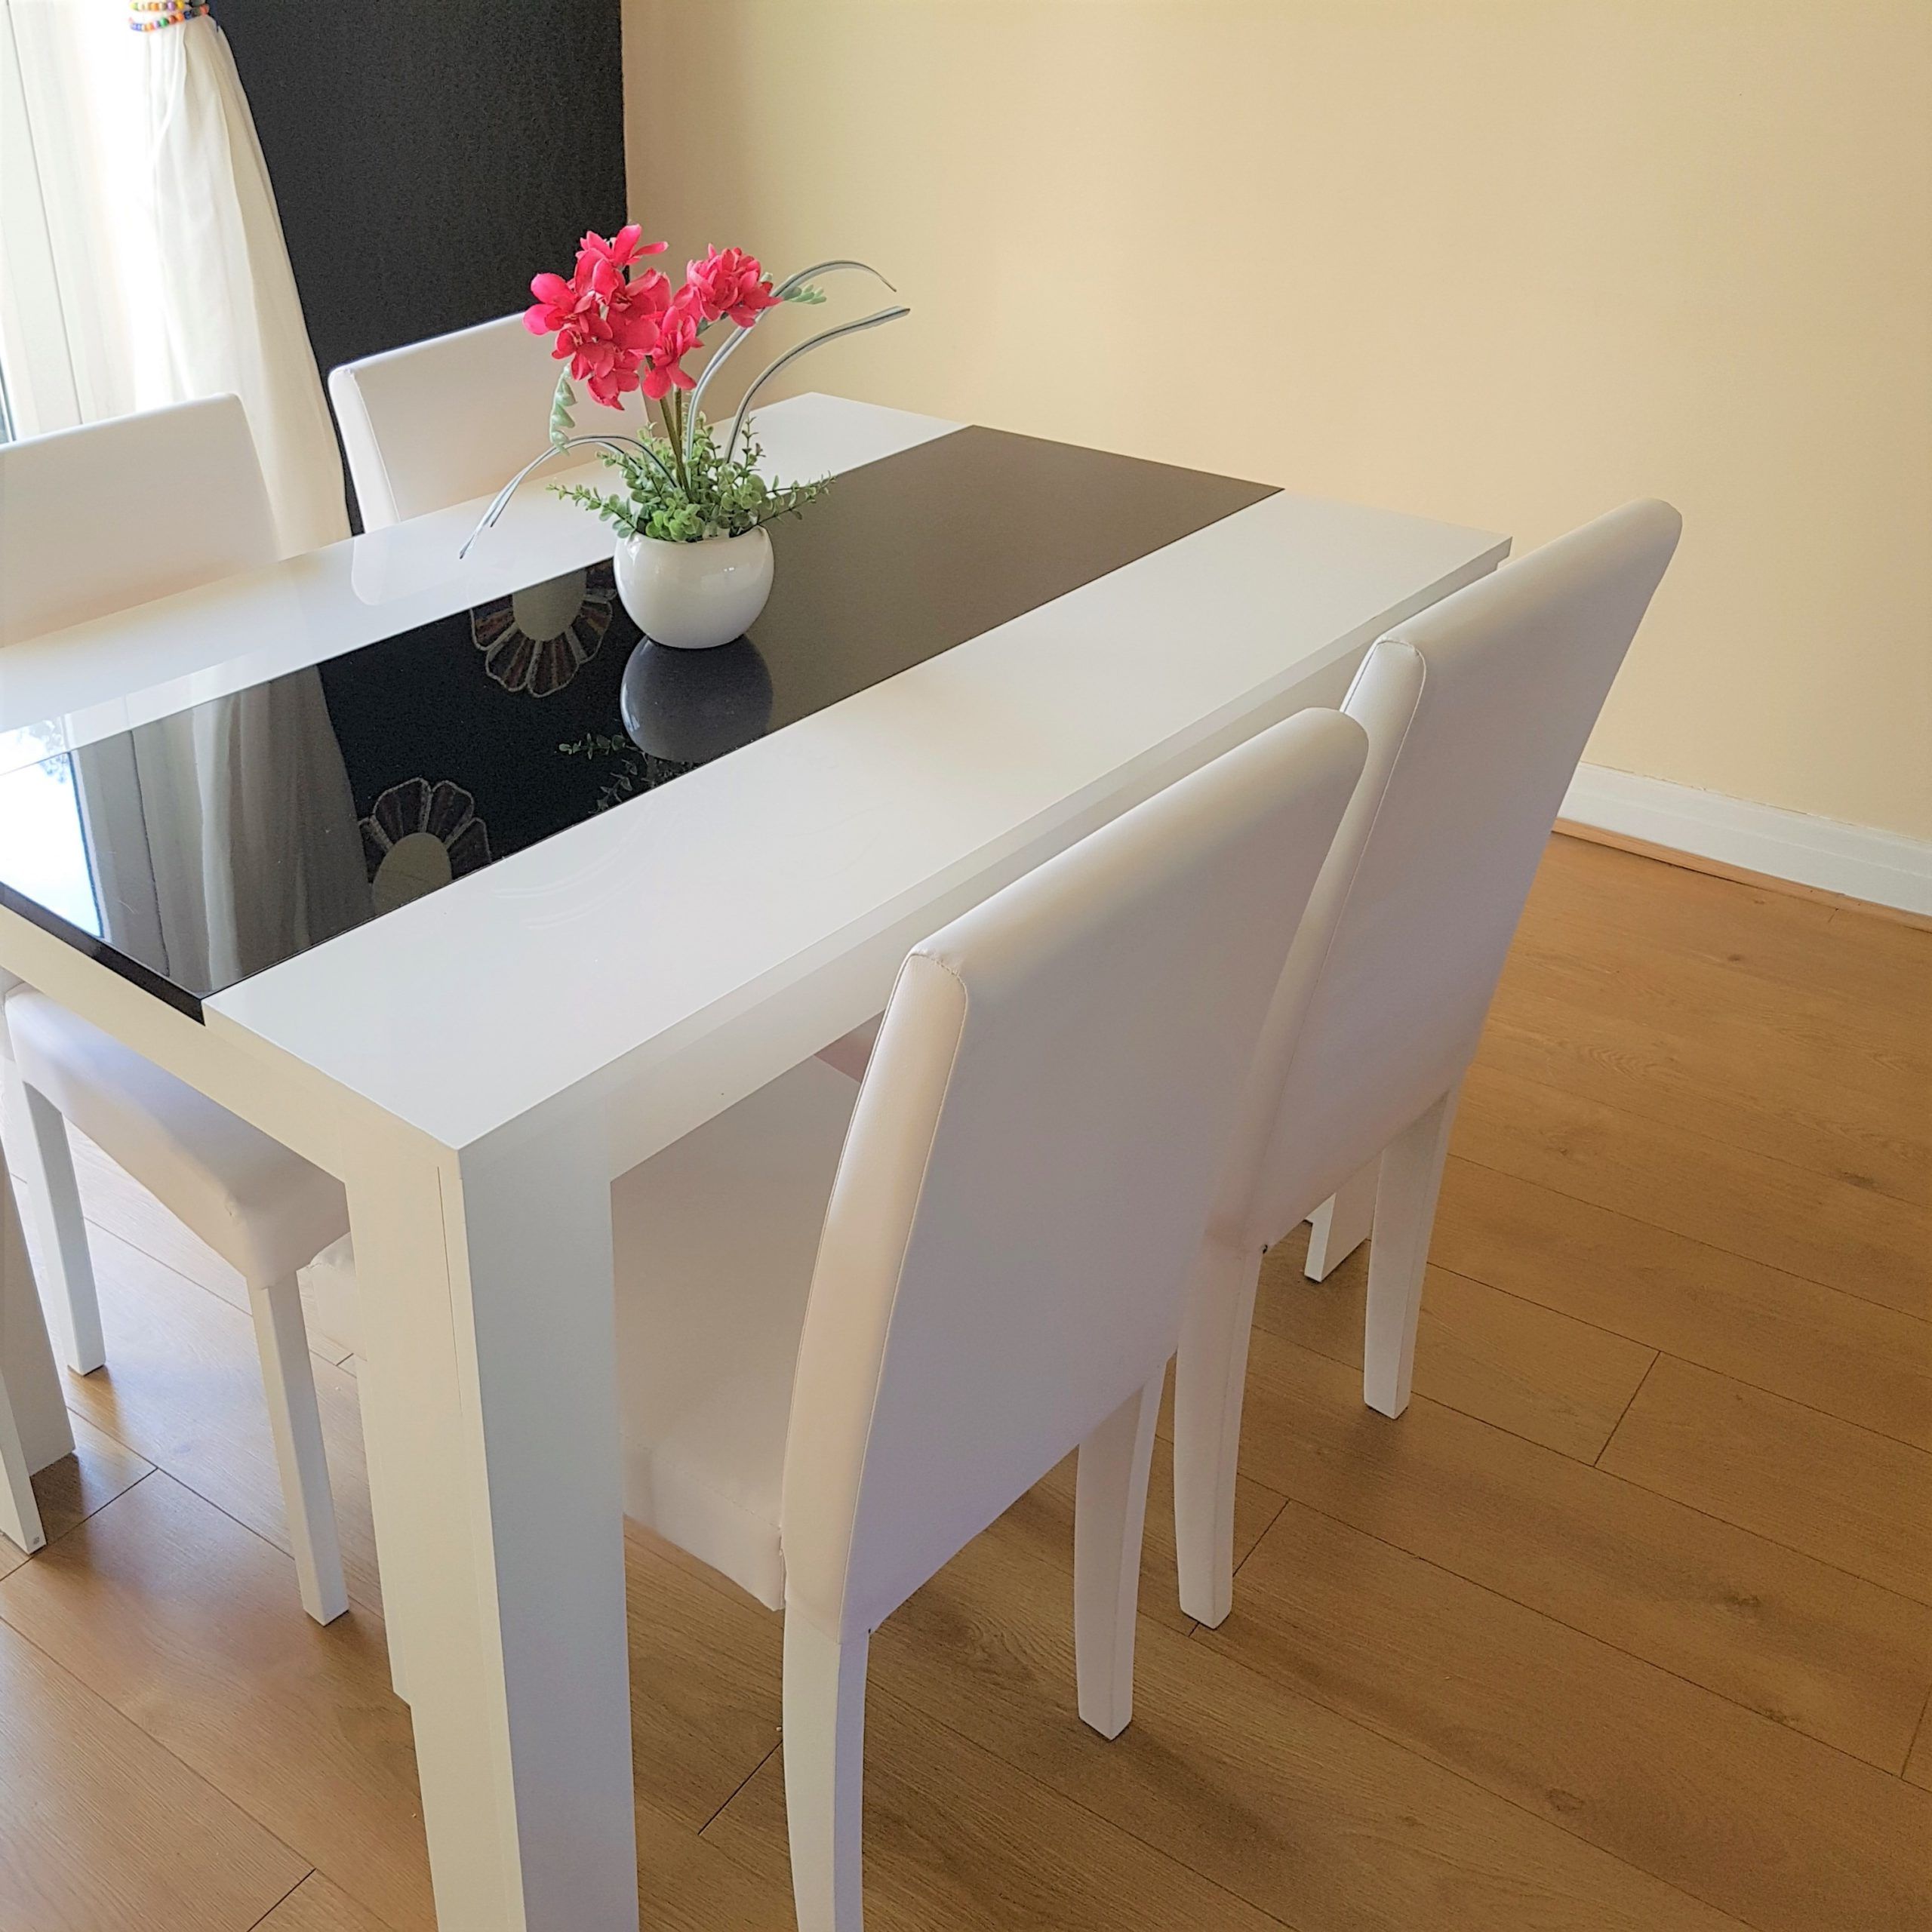 Preferred White And Black Dining Tables Intended For Modern White And Black Wood Dining Table With 4 White Faux (Gallery 18 of 20)